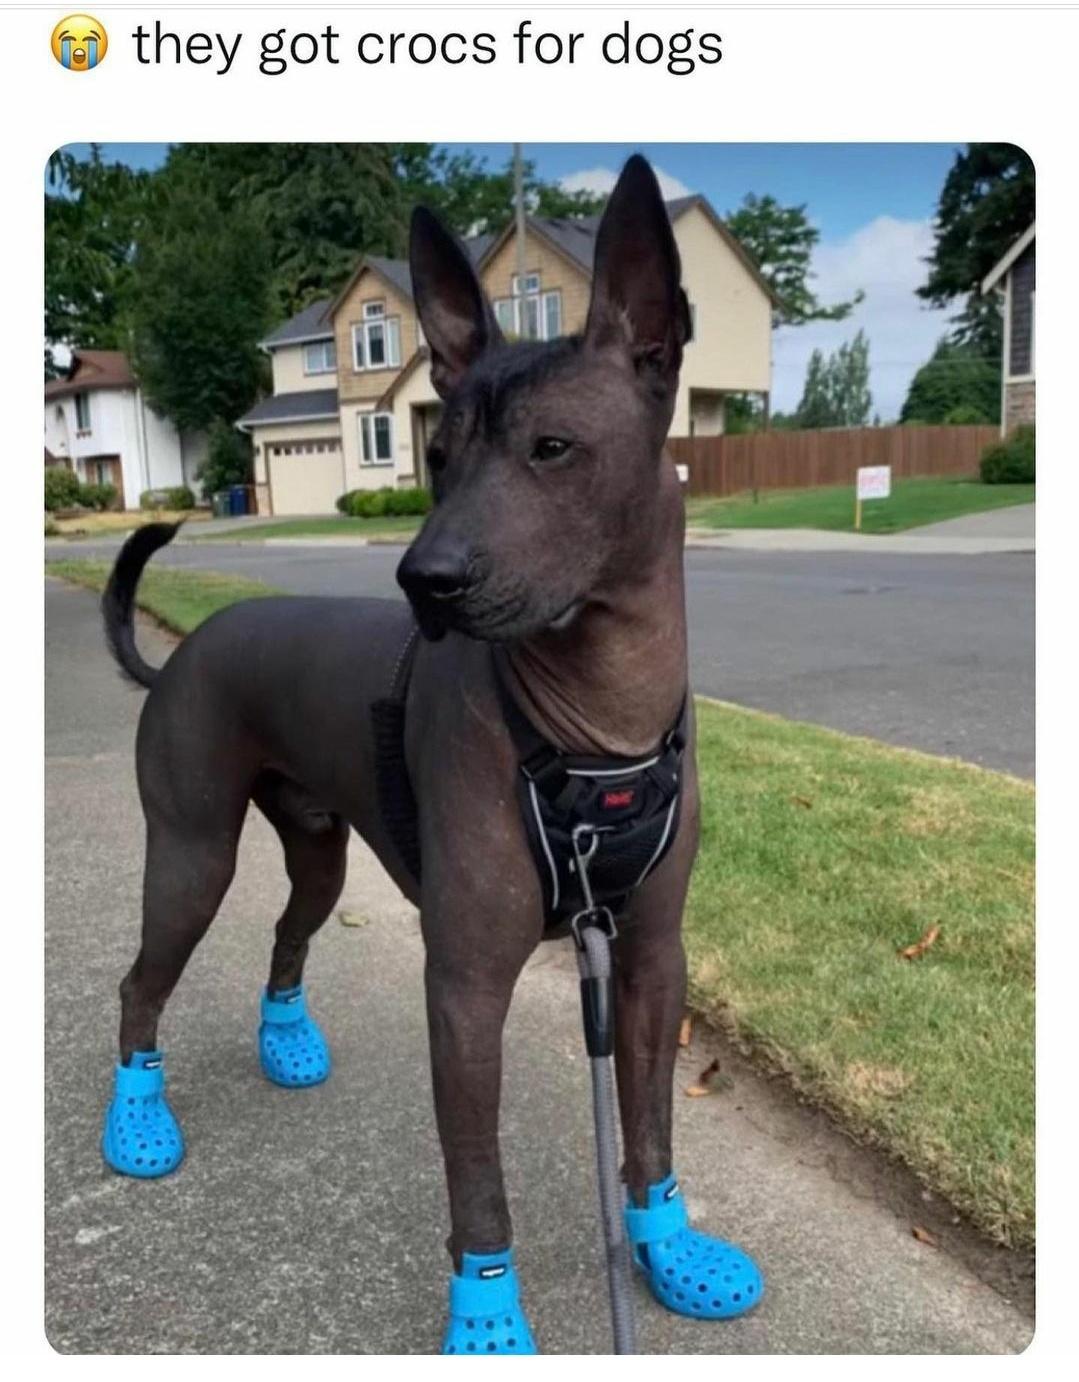 dank memes - funny memes - dog - they got crocs for dogs